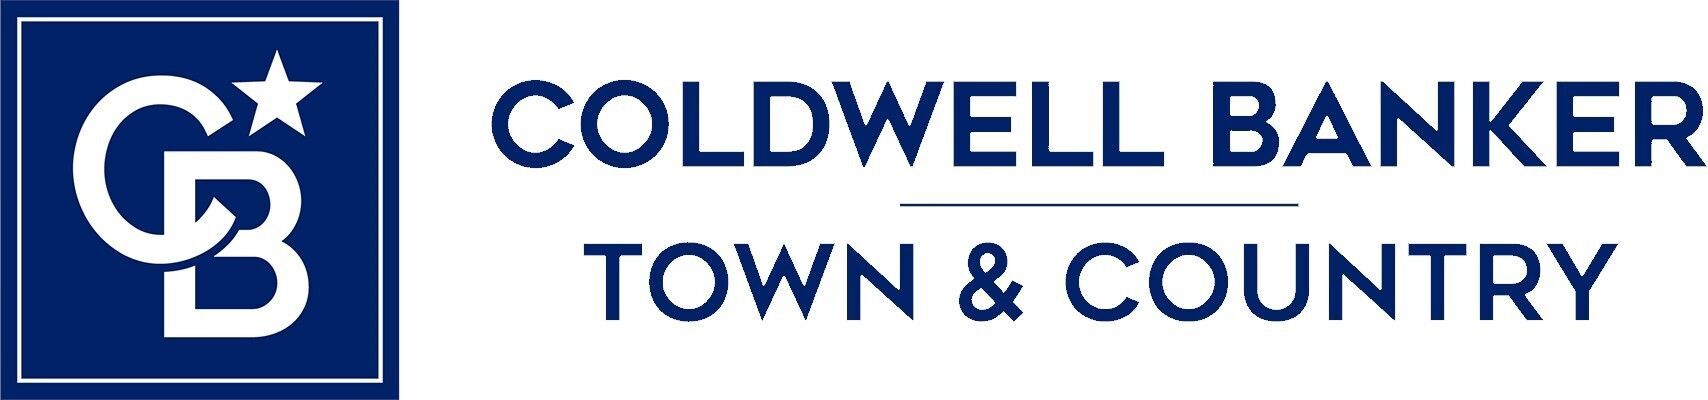 Coldwell Banker Town & Country